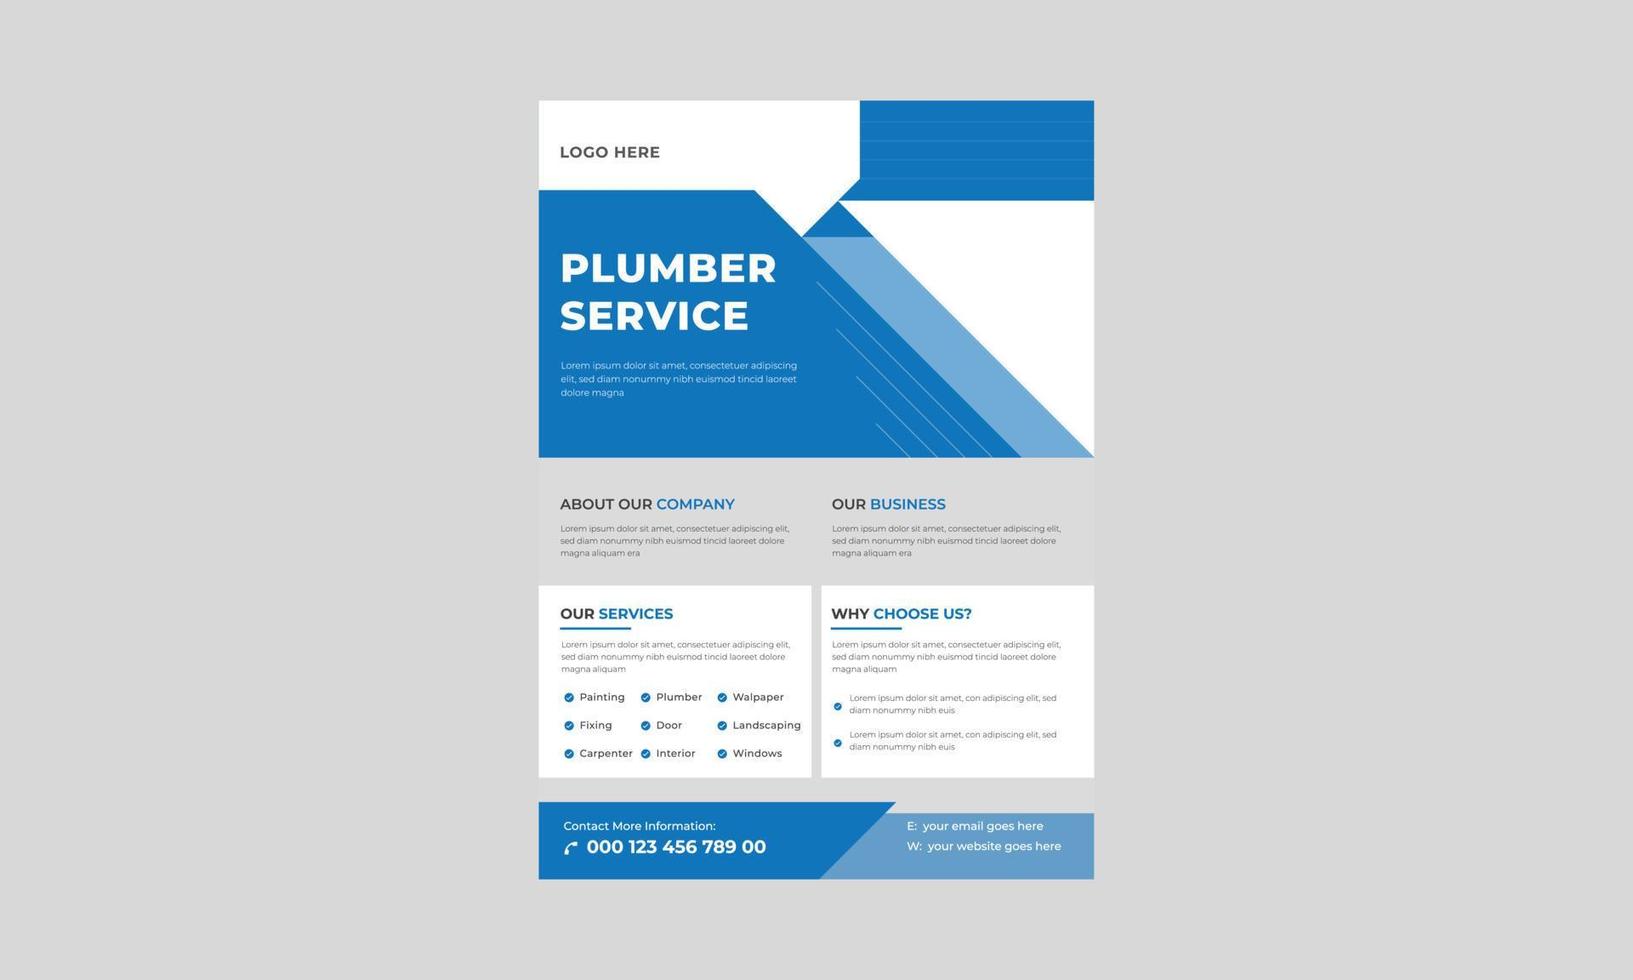 Need A Plumbing Services, Plumber Service Flyer Template, Handyman, plumber flyer design for company, Plumbing service flyer poster design. vector